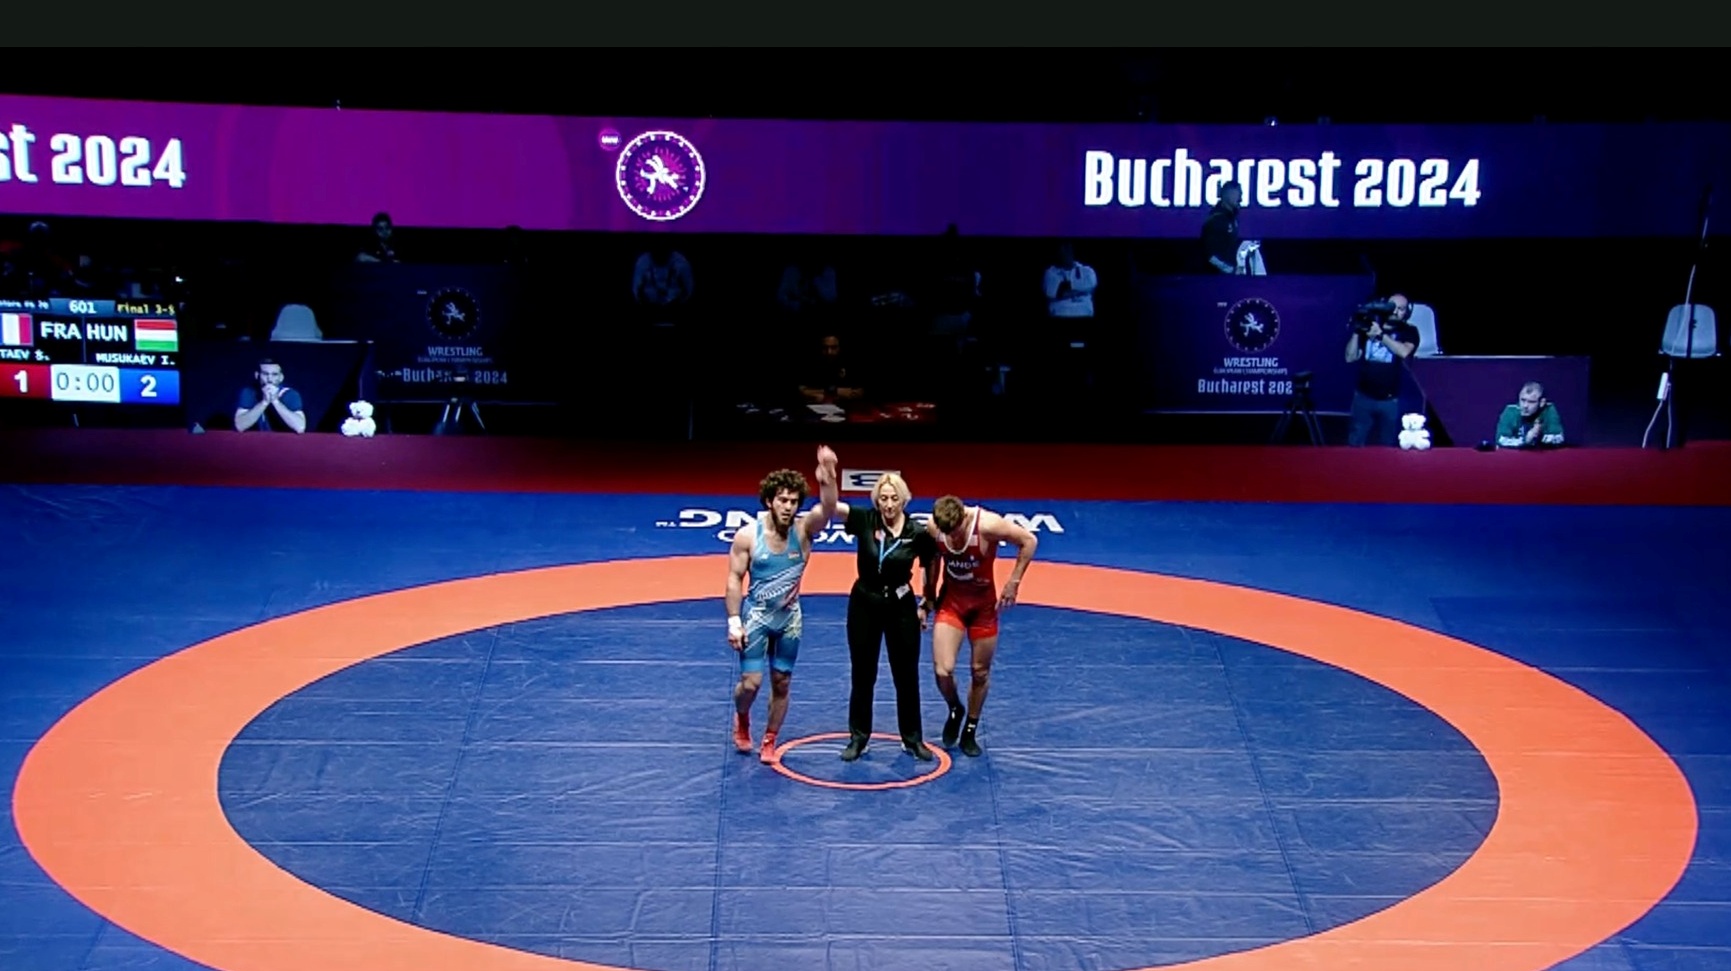 Two More Medals at the European Wrestling Championships